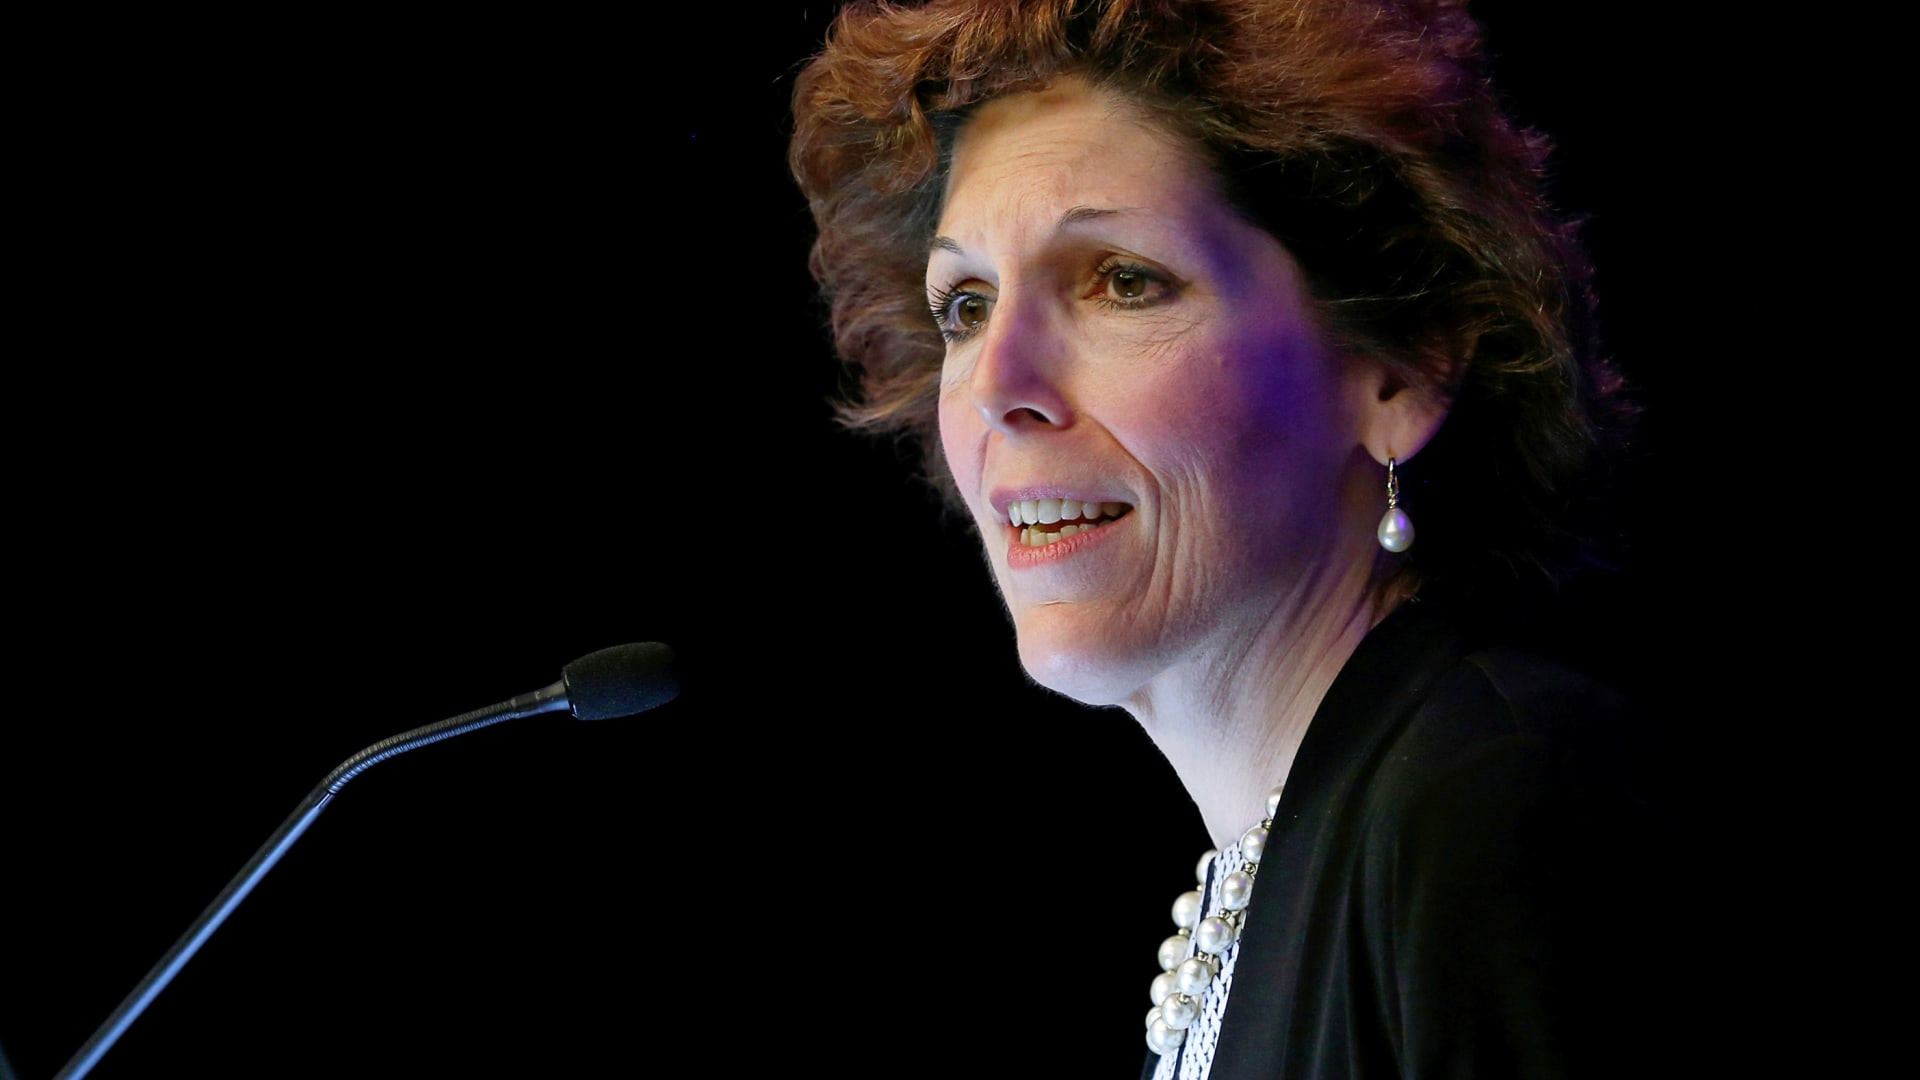 Cleveland Federal Reserve President and CEO Loretta Mester gives her keynote address at the 2014 Financial Stability Conference in Washington December 5, 2014.